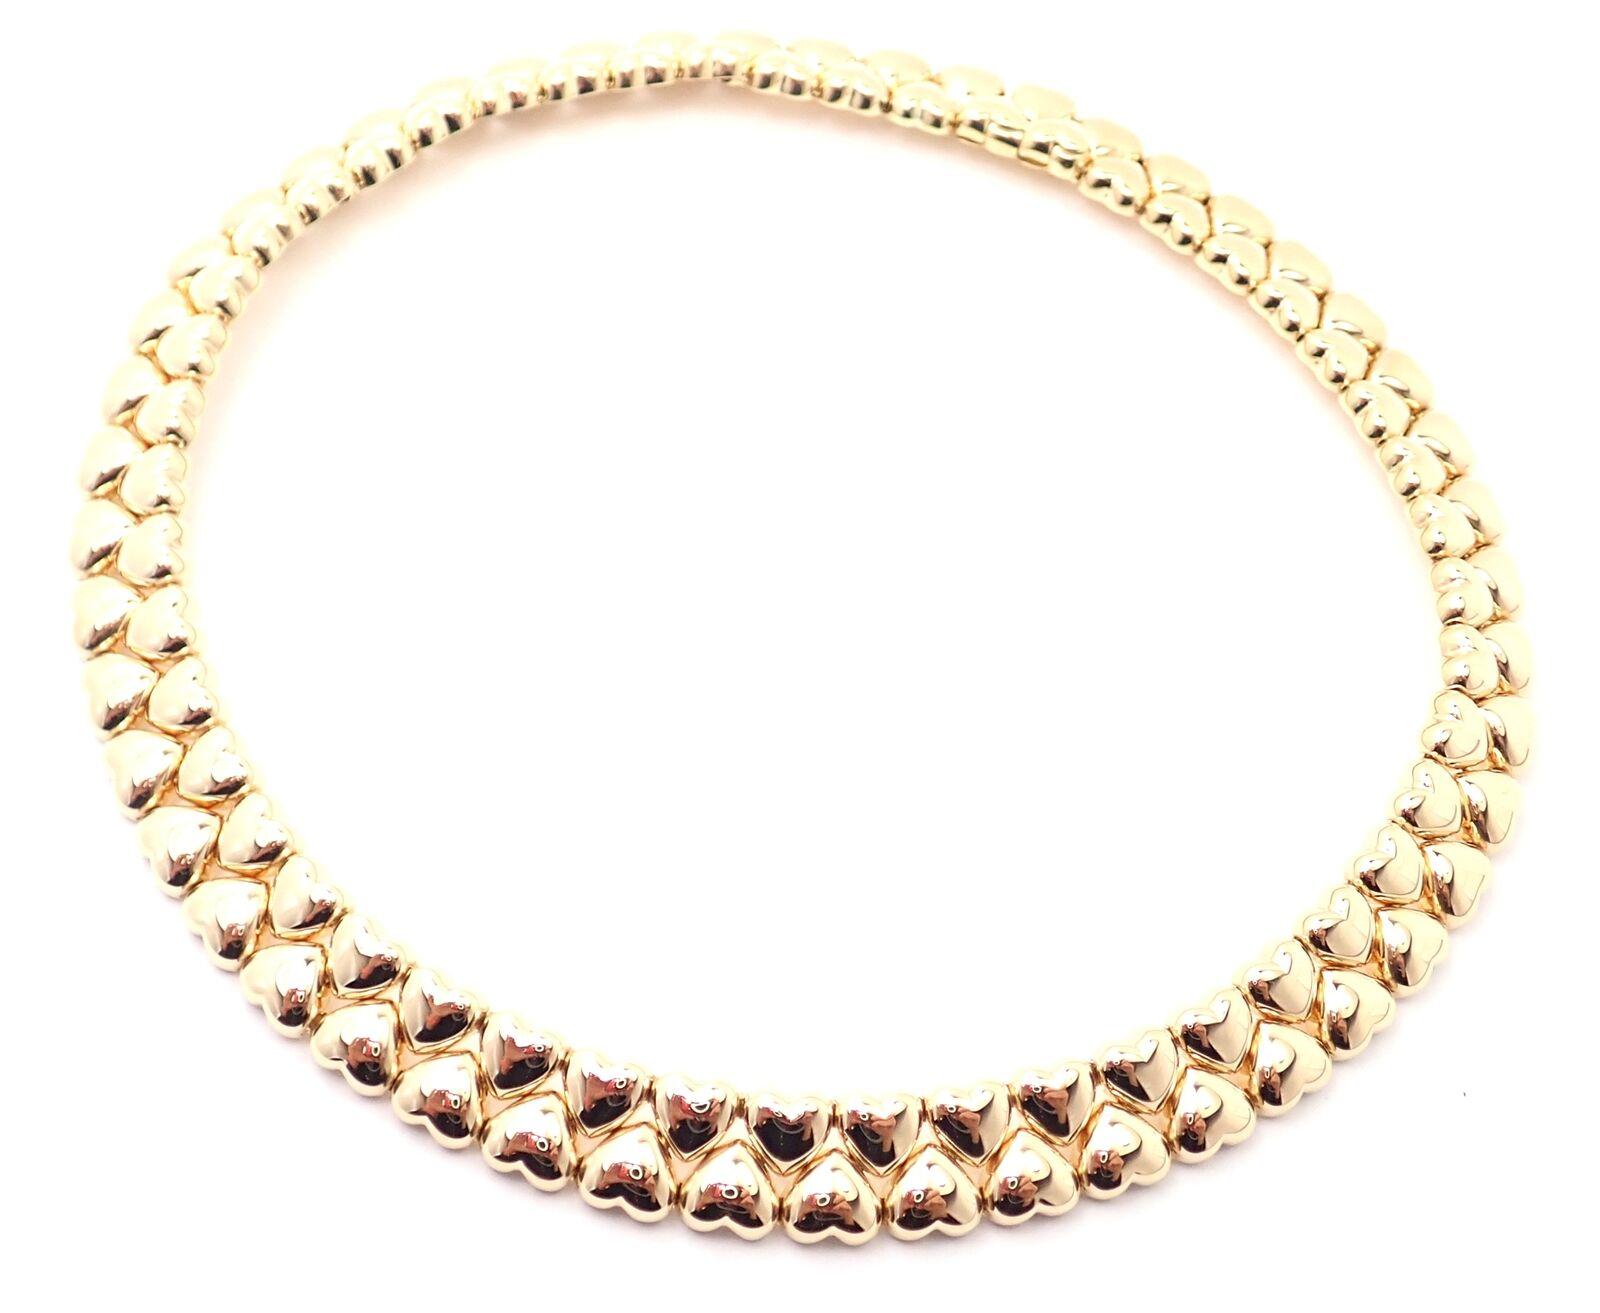 18k Yellow Gold Double Row Heart Choker Necklace by Cartier. 
Details: 
Weight: 87.2 grams
Length: 16